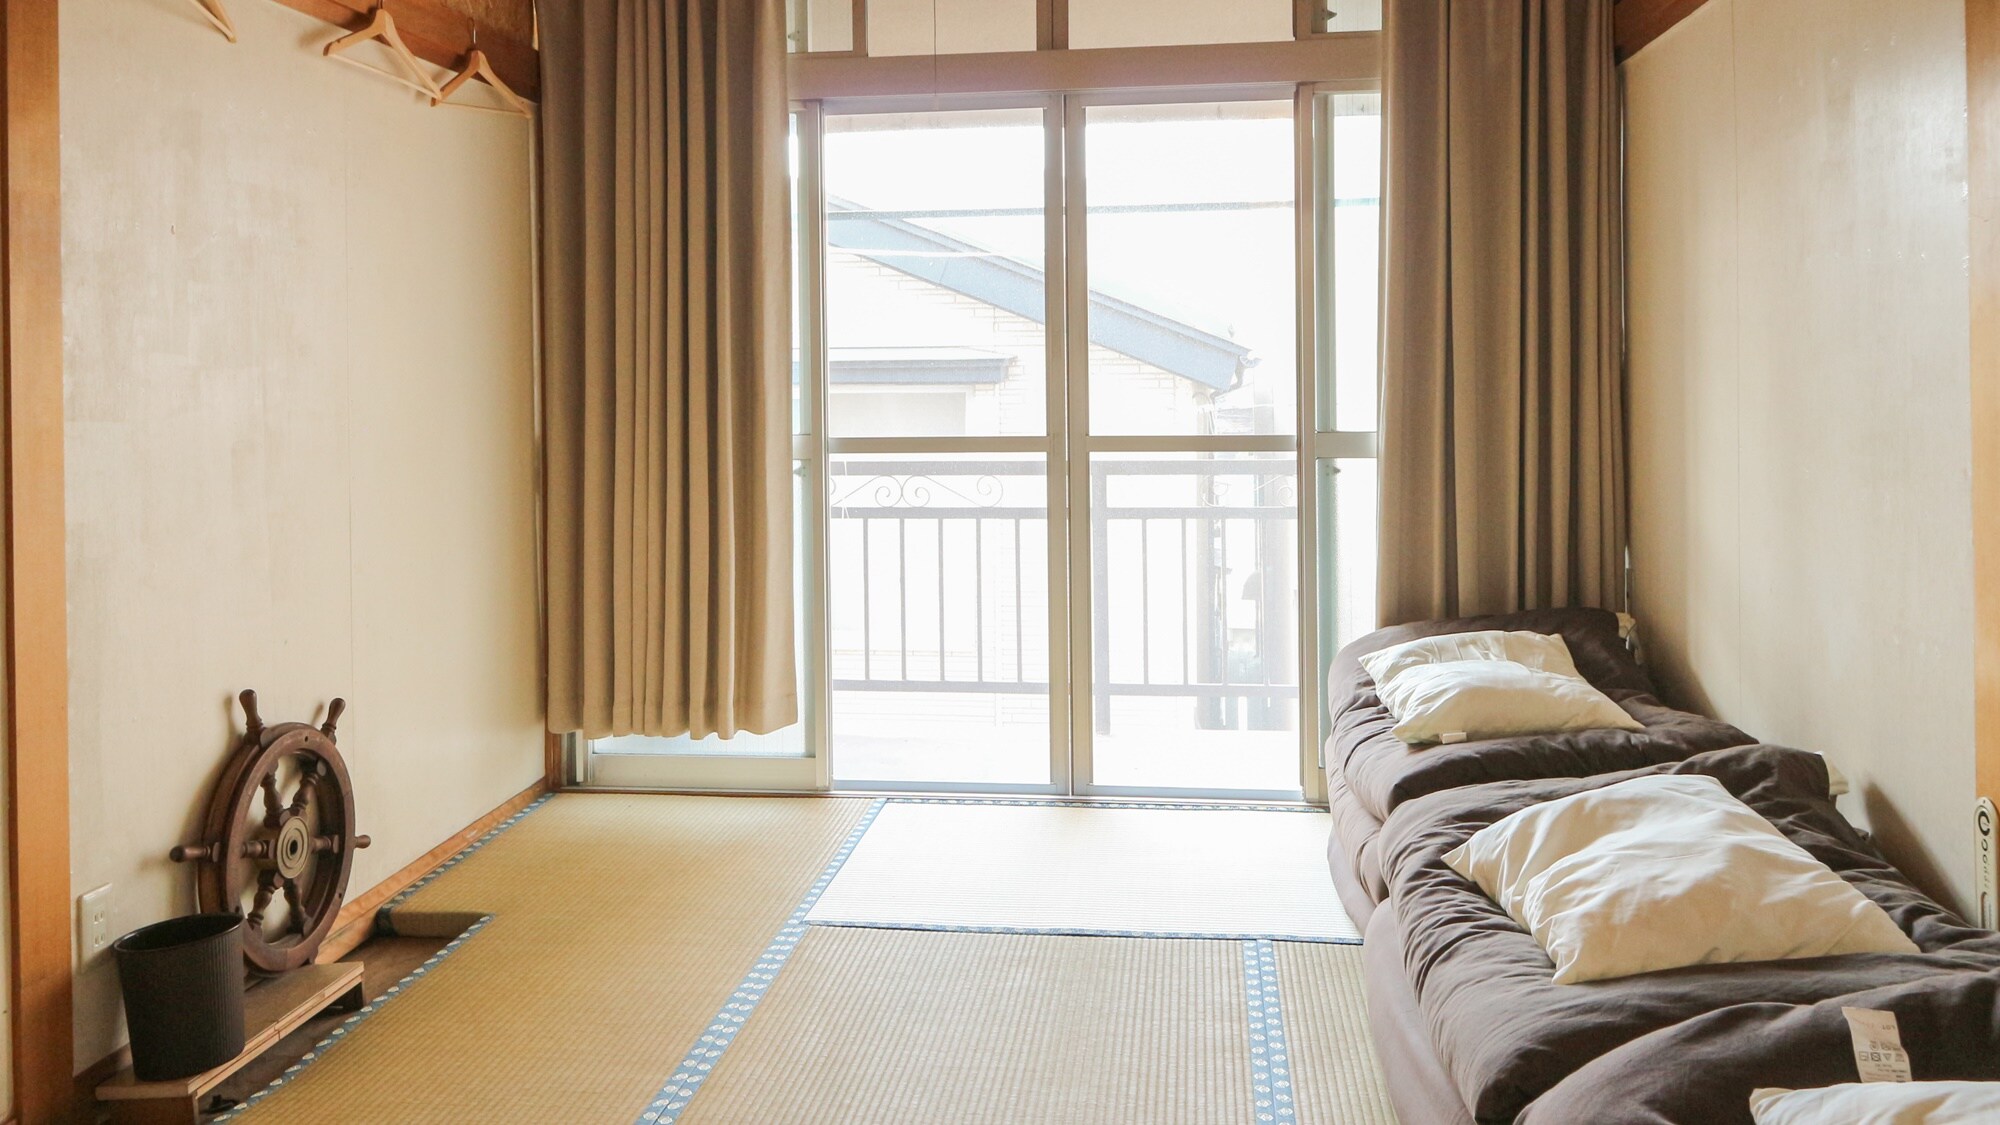 * Private room / It is separated from the next shared living room to the fusuma.